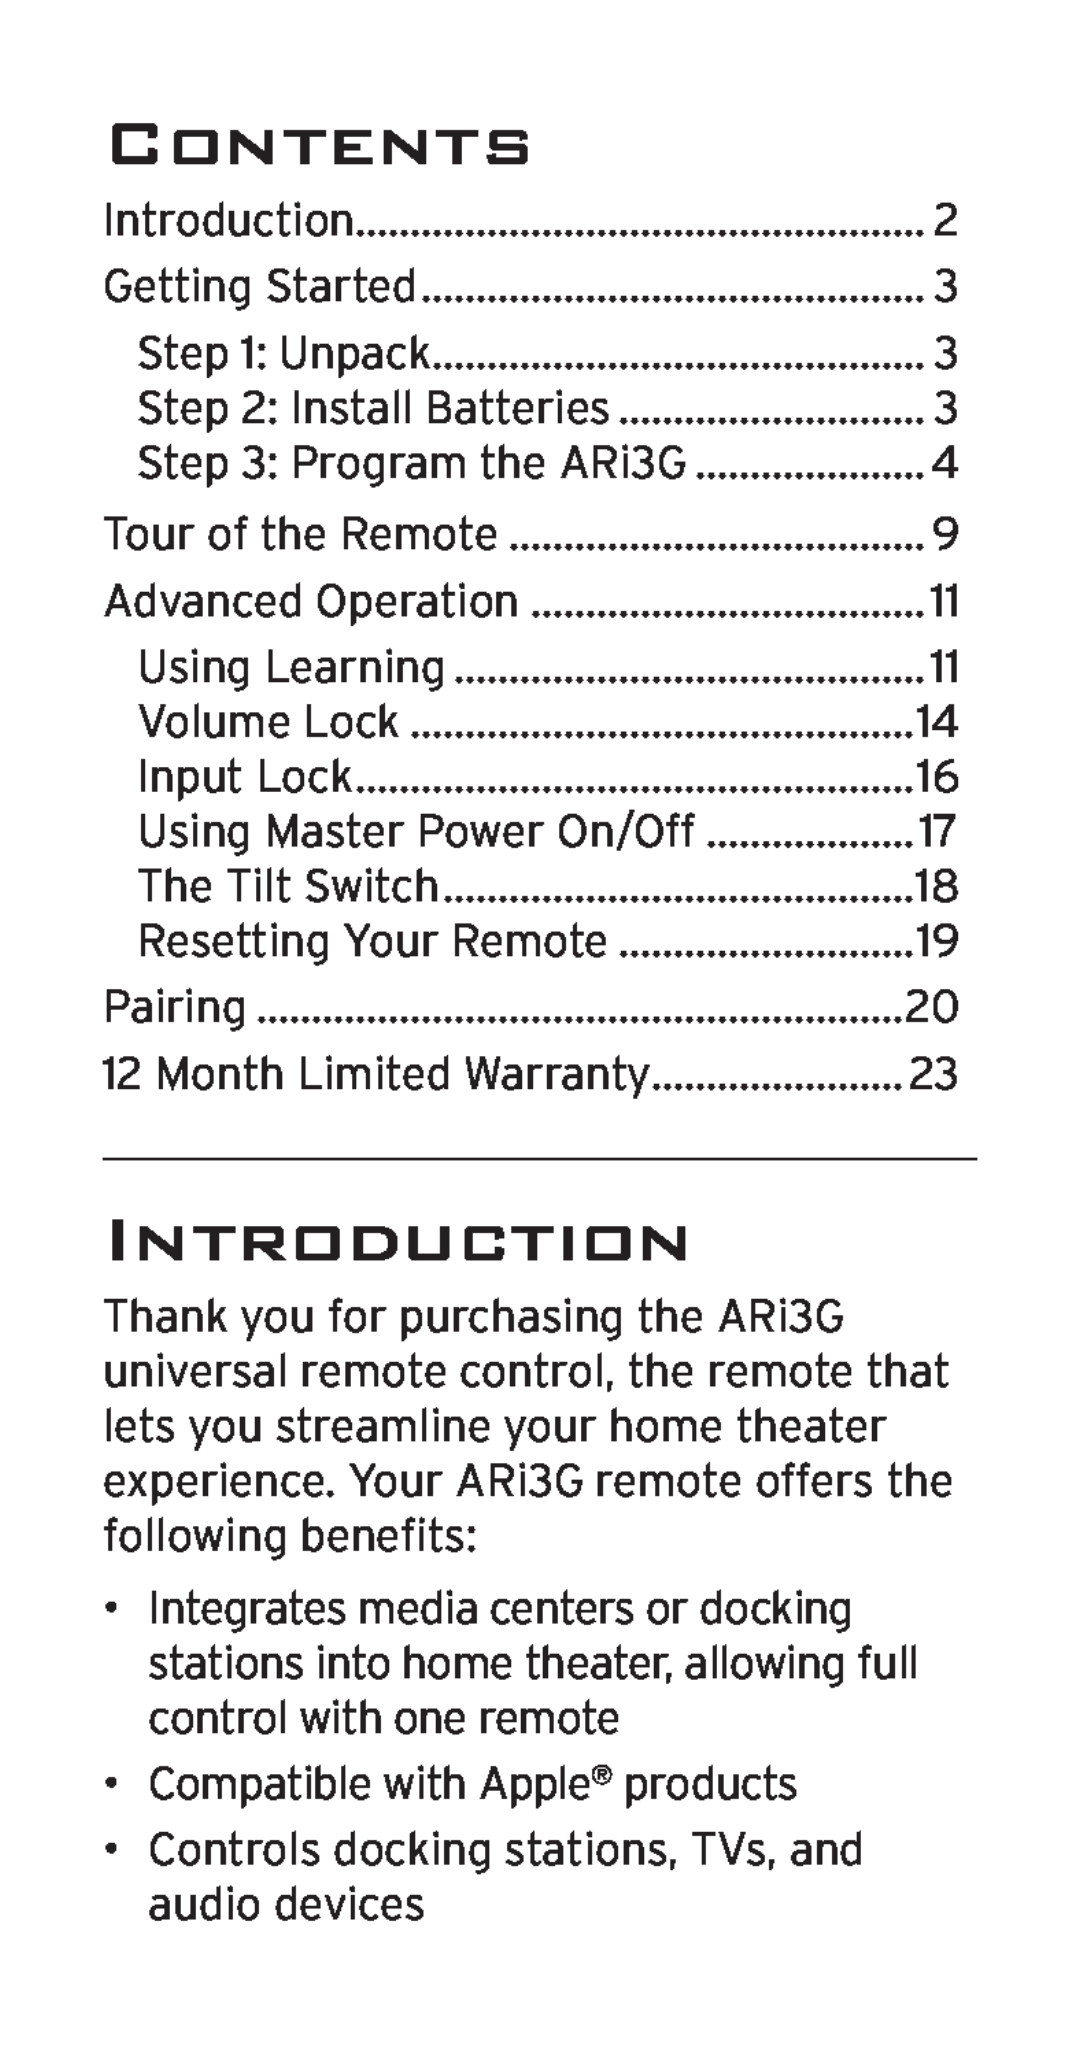 Acoustic Research ARRI03G, ARi3G manual Contents, Introduction 